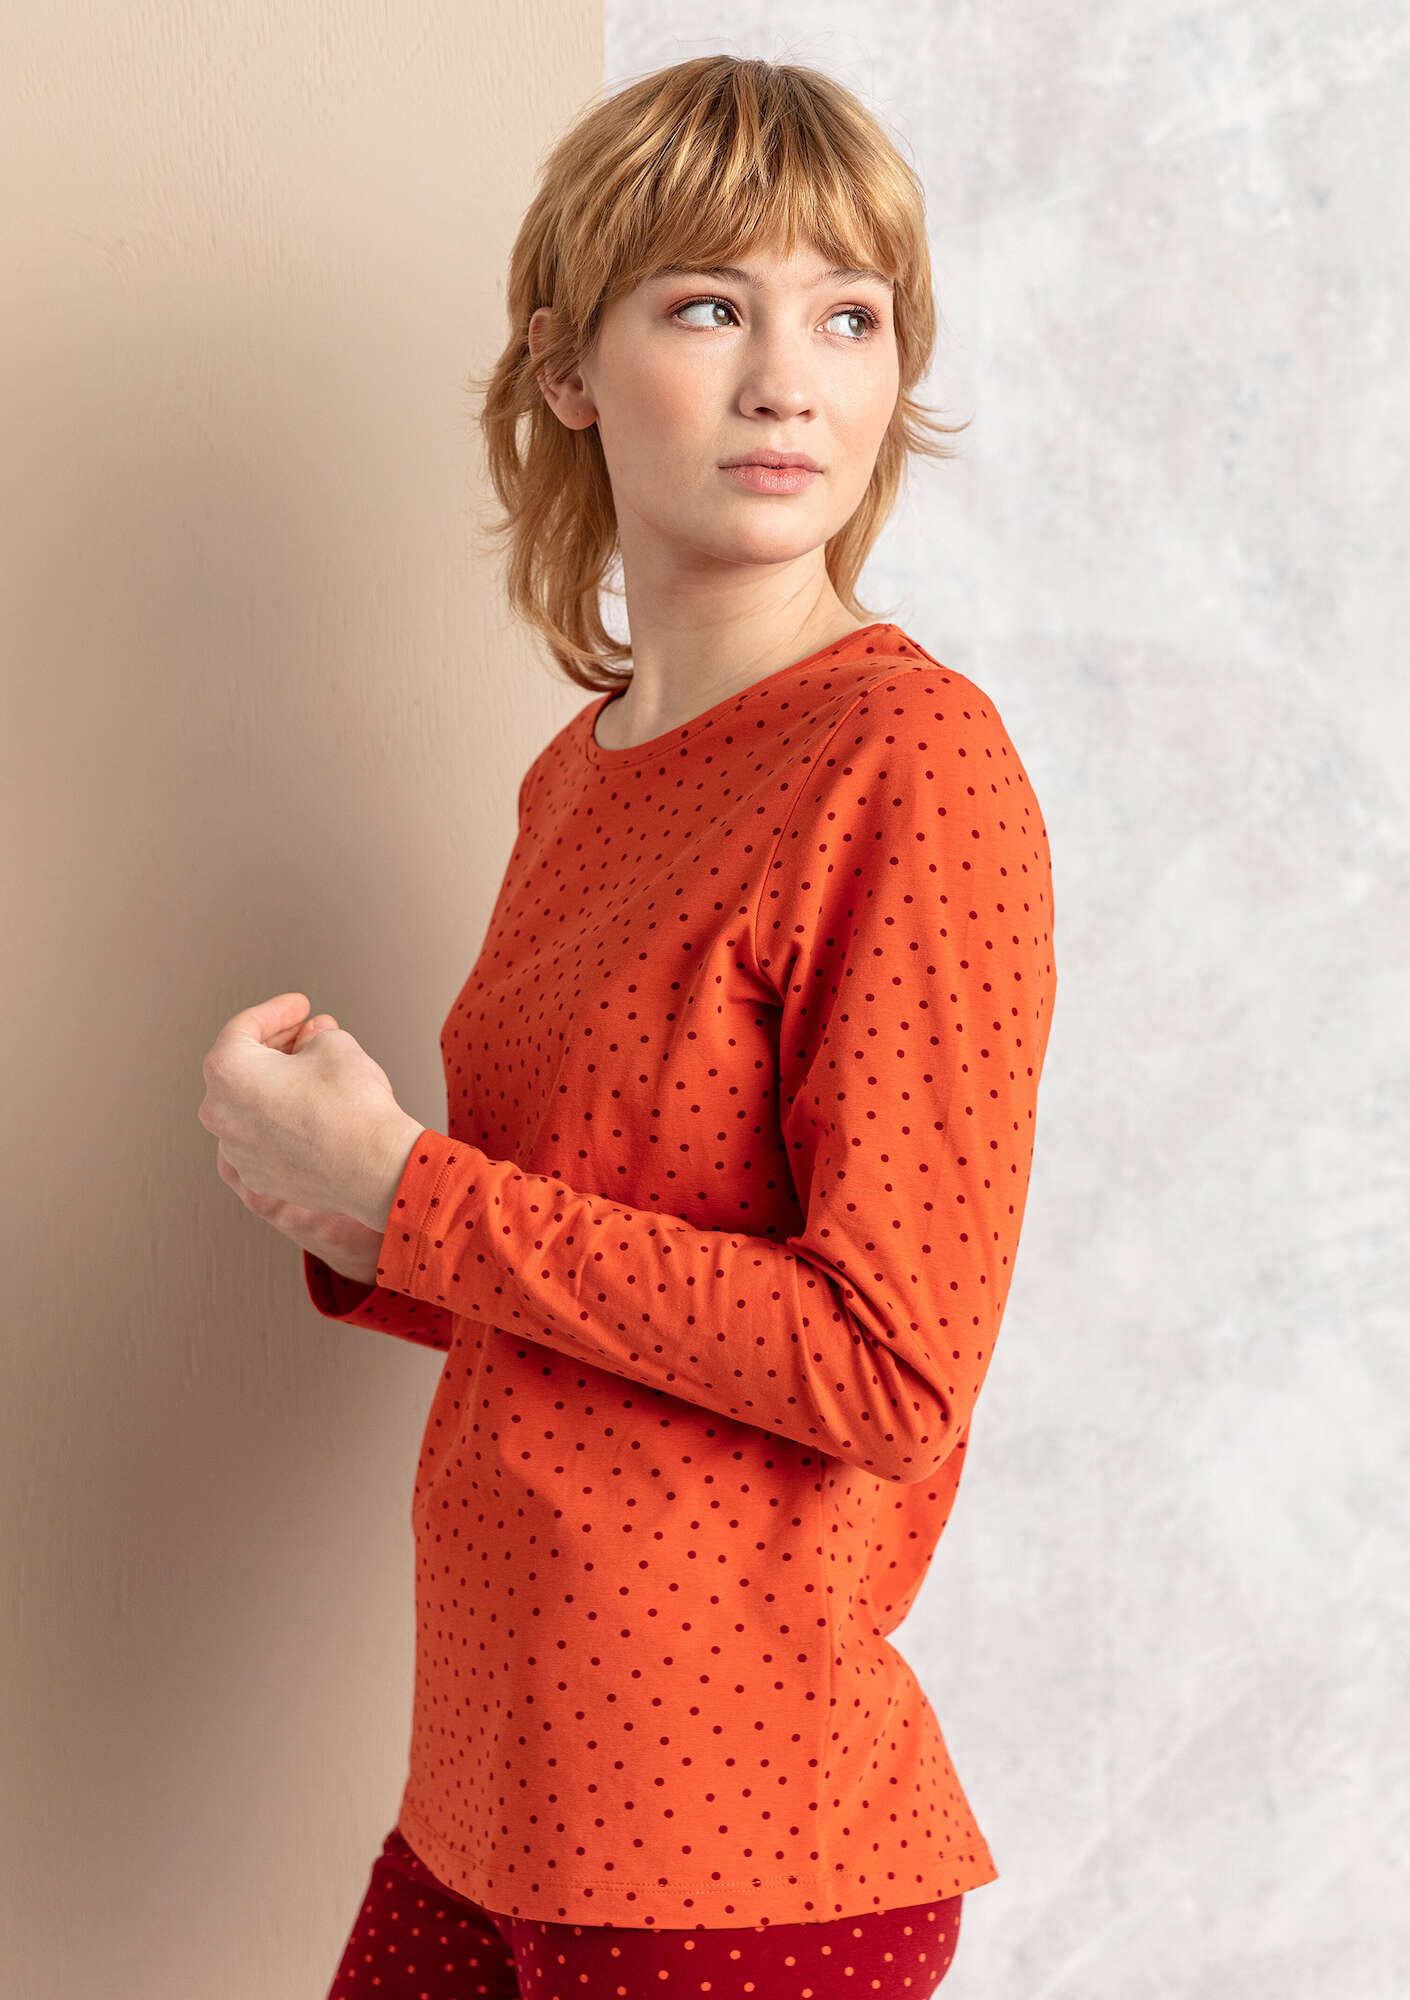 “Pytte” jersey top in organic cotton/elastane chili/patterned